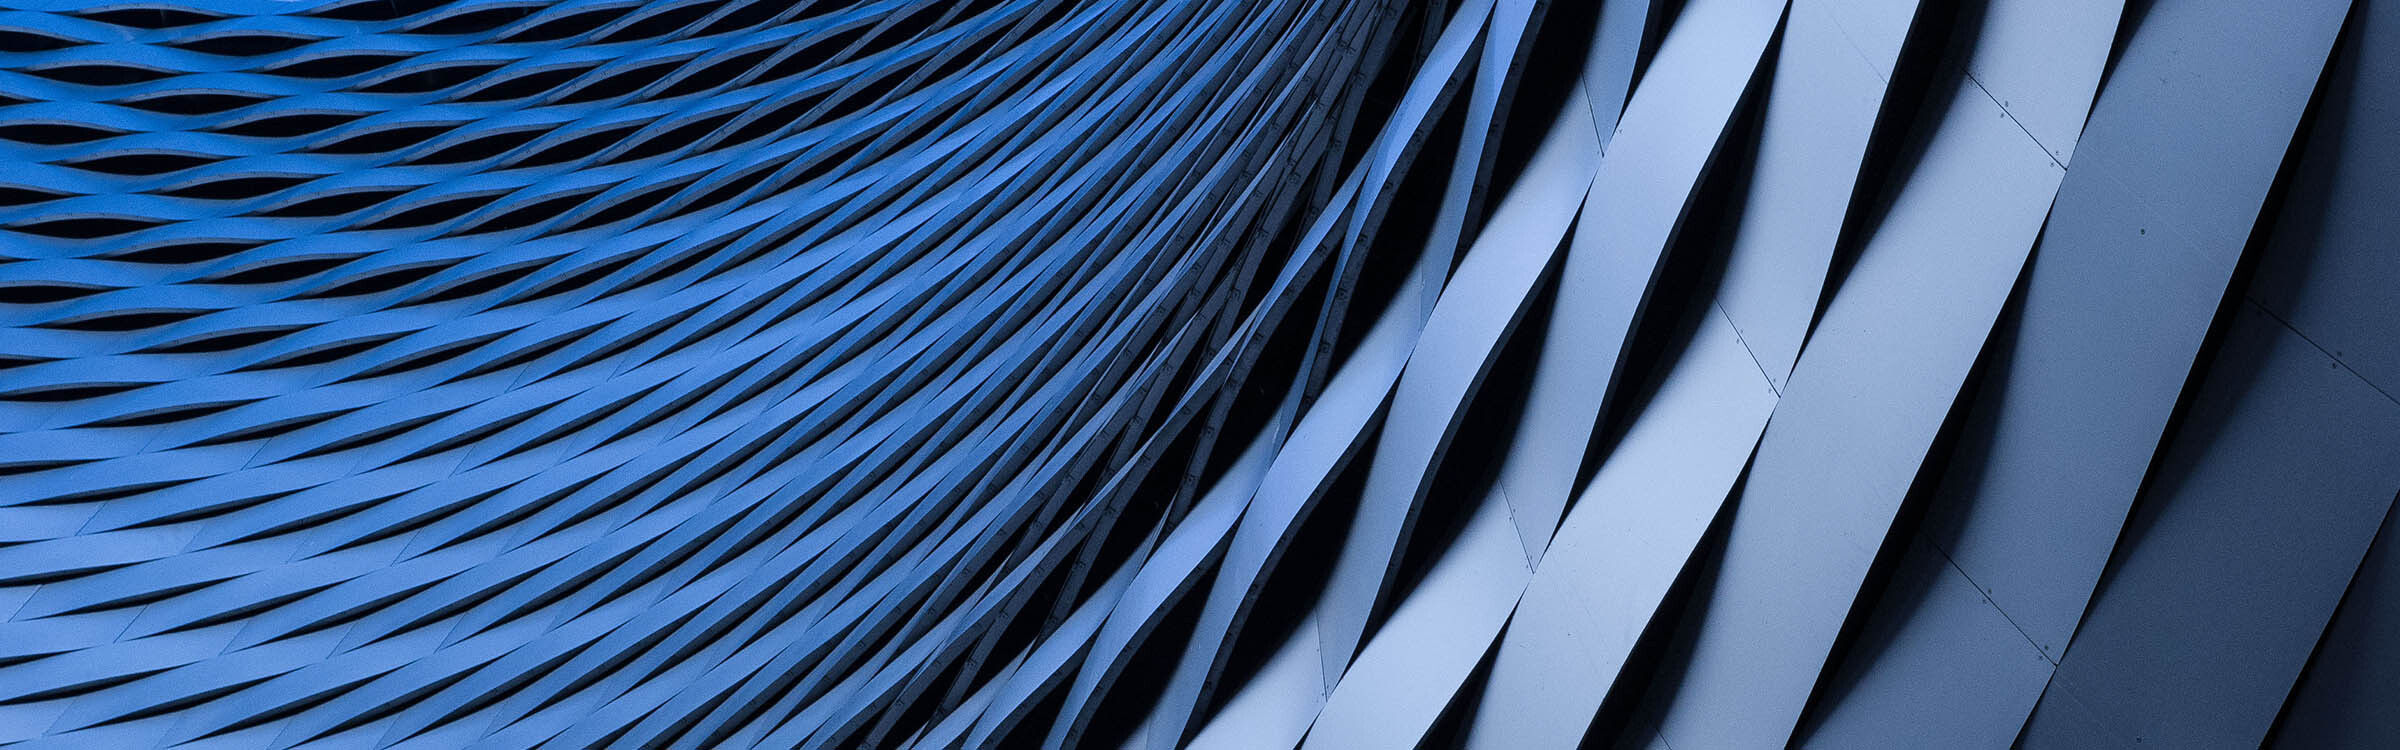 Abstract: Blue waves